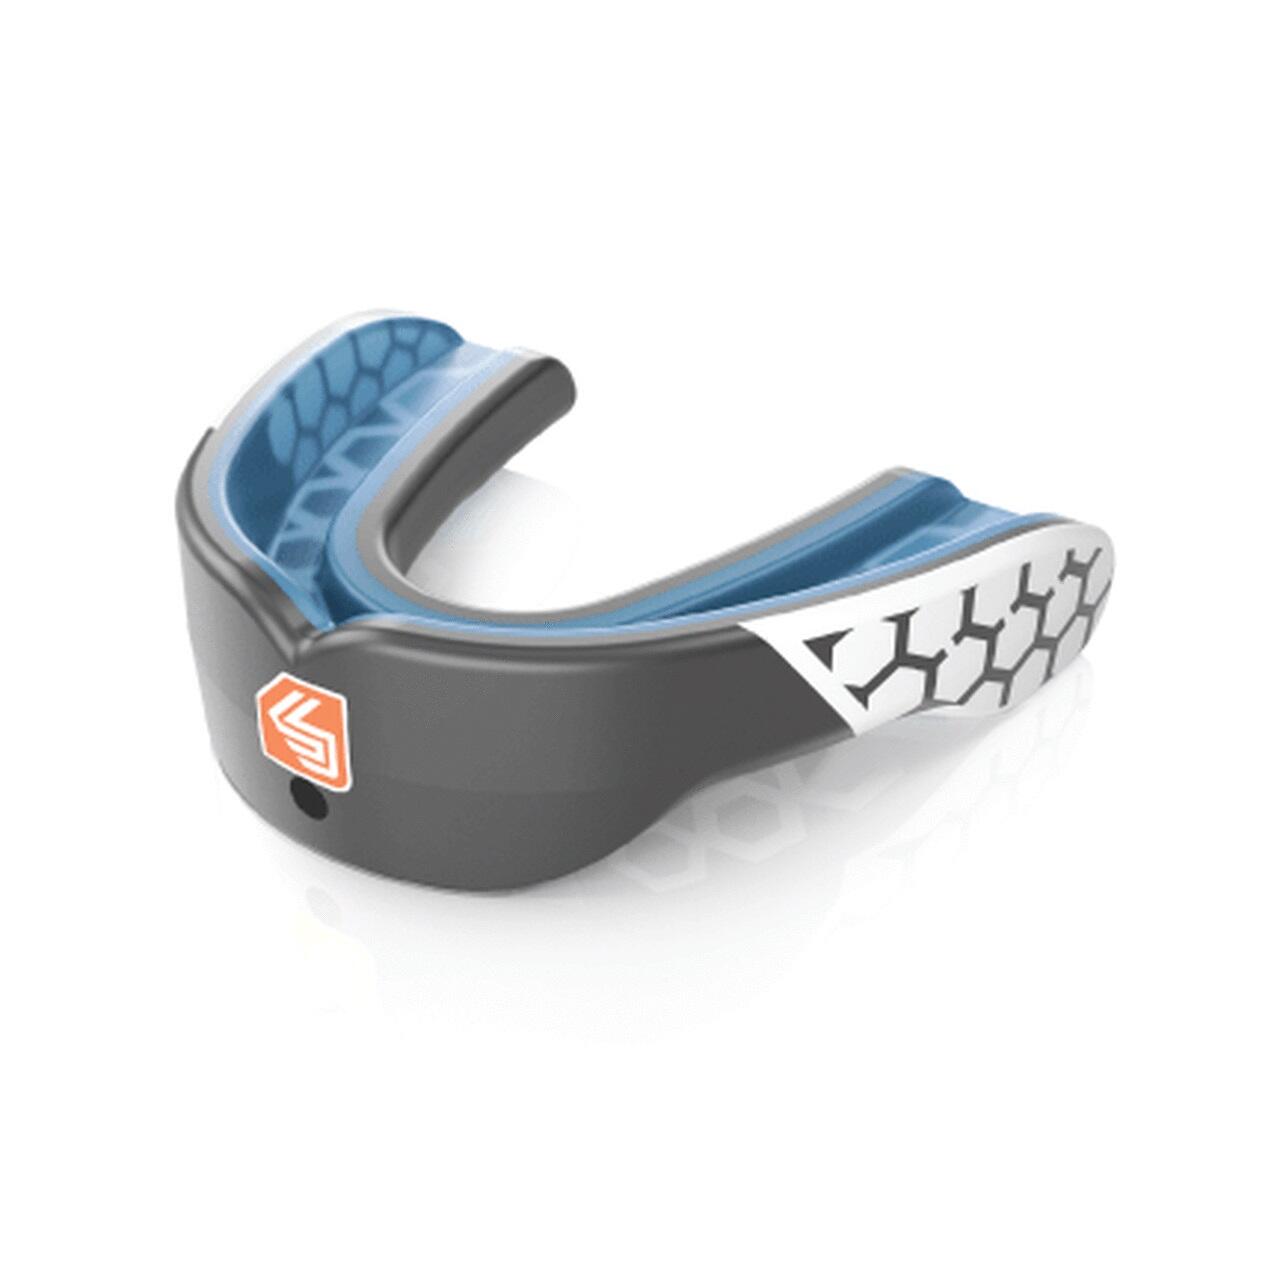 SHOCK DOCTOR Unisex Adult Gel Max Power Mouthguard (Carbon/White)